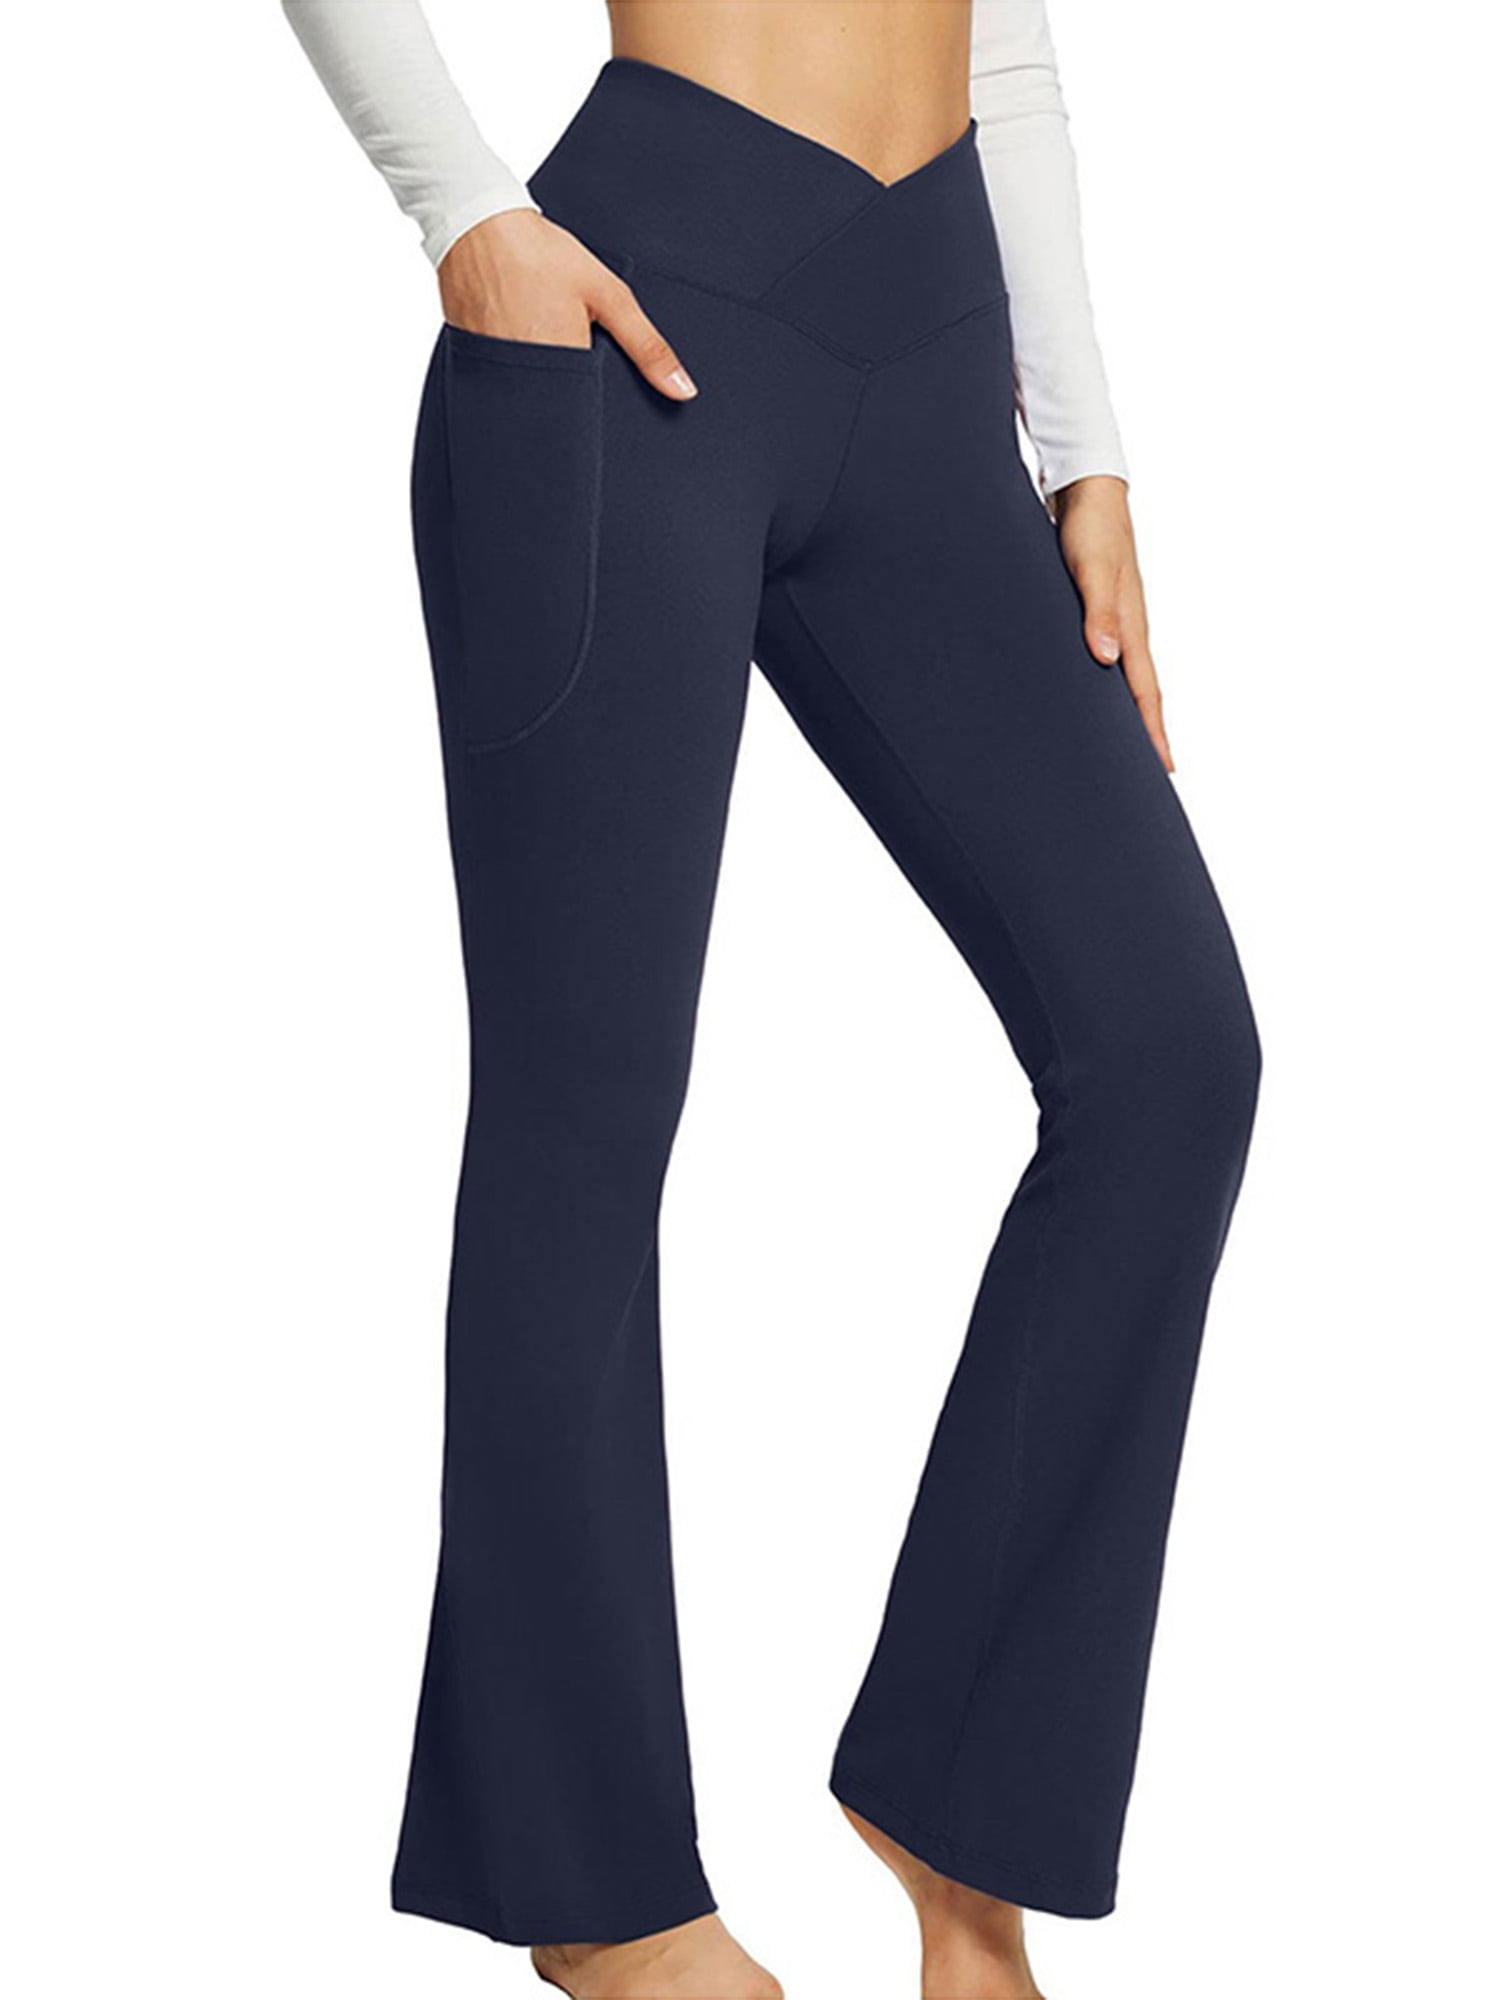 Flare Yoga Pants with Pockets for Women,High Waisted V Crossover Bootcut Yoga  Leggings Stretchy Casual Workout Pants..($17.99) For  USA 🇺🇸  Testers inbox me if you are interested : r/ItemGuide